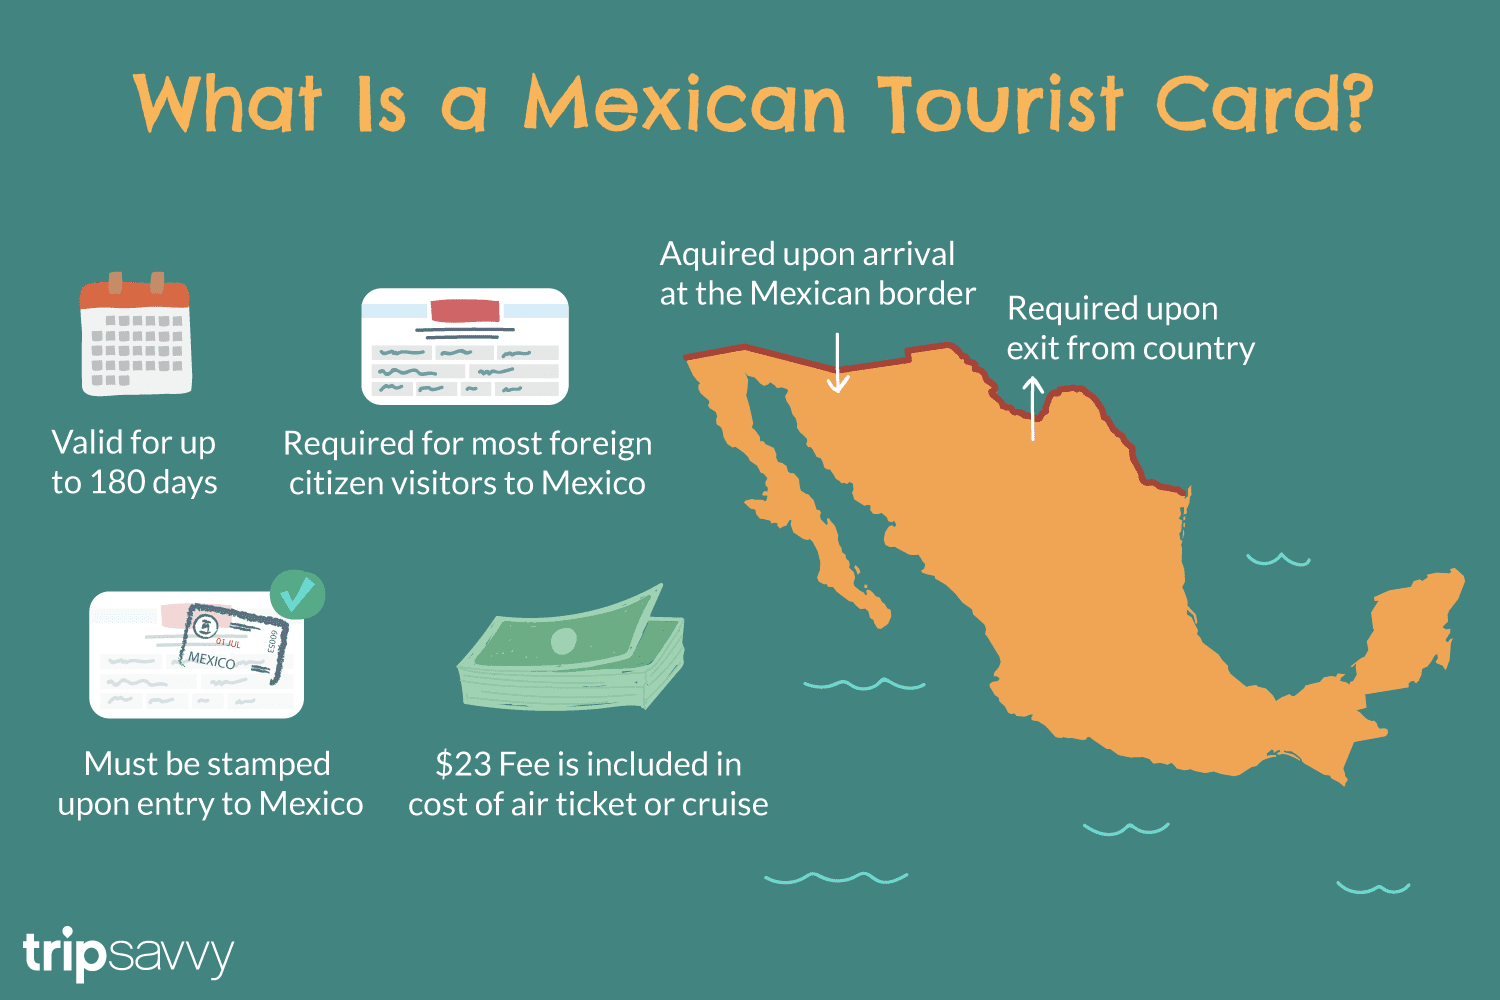 Mexico Tourist Card and How to Get One The Cruise Genius (Scott Lara)